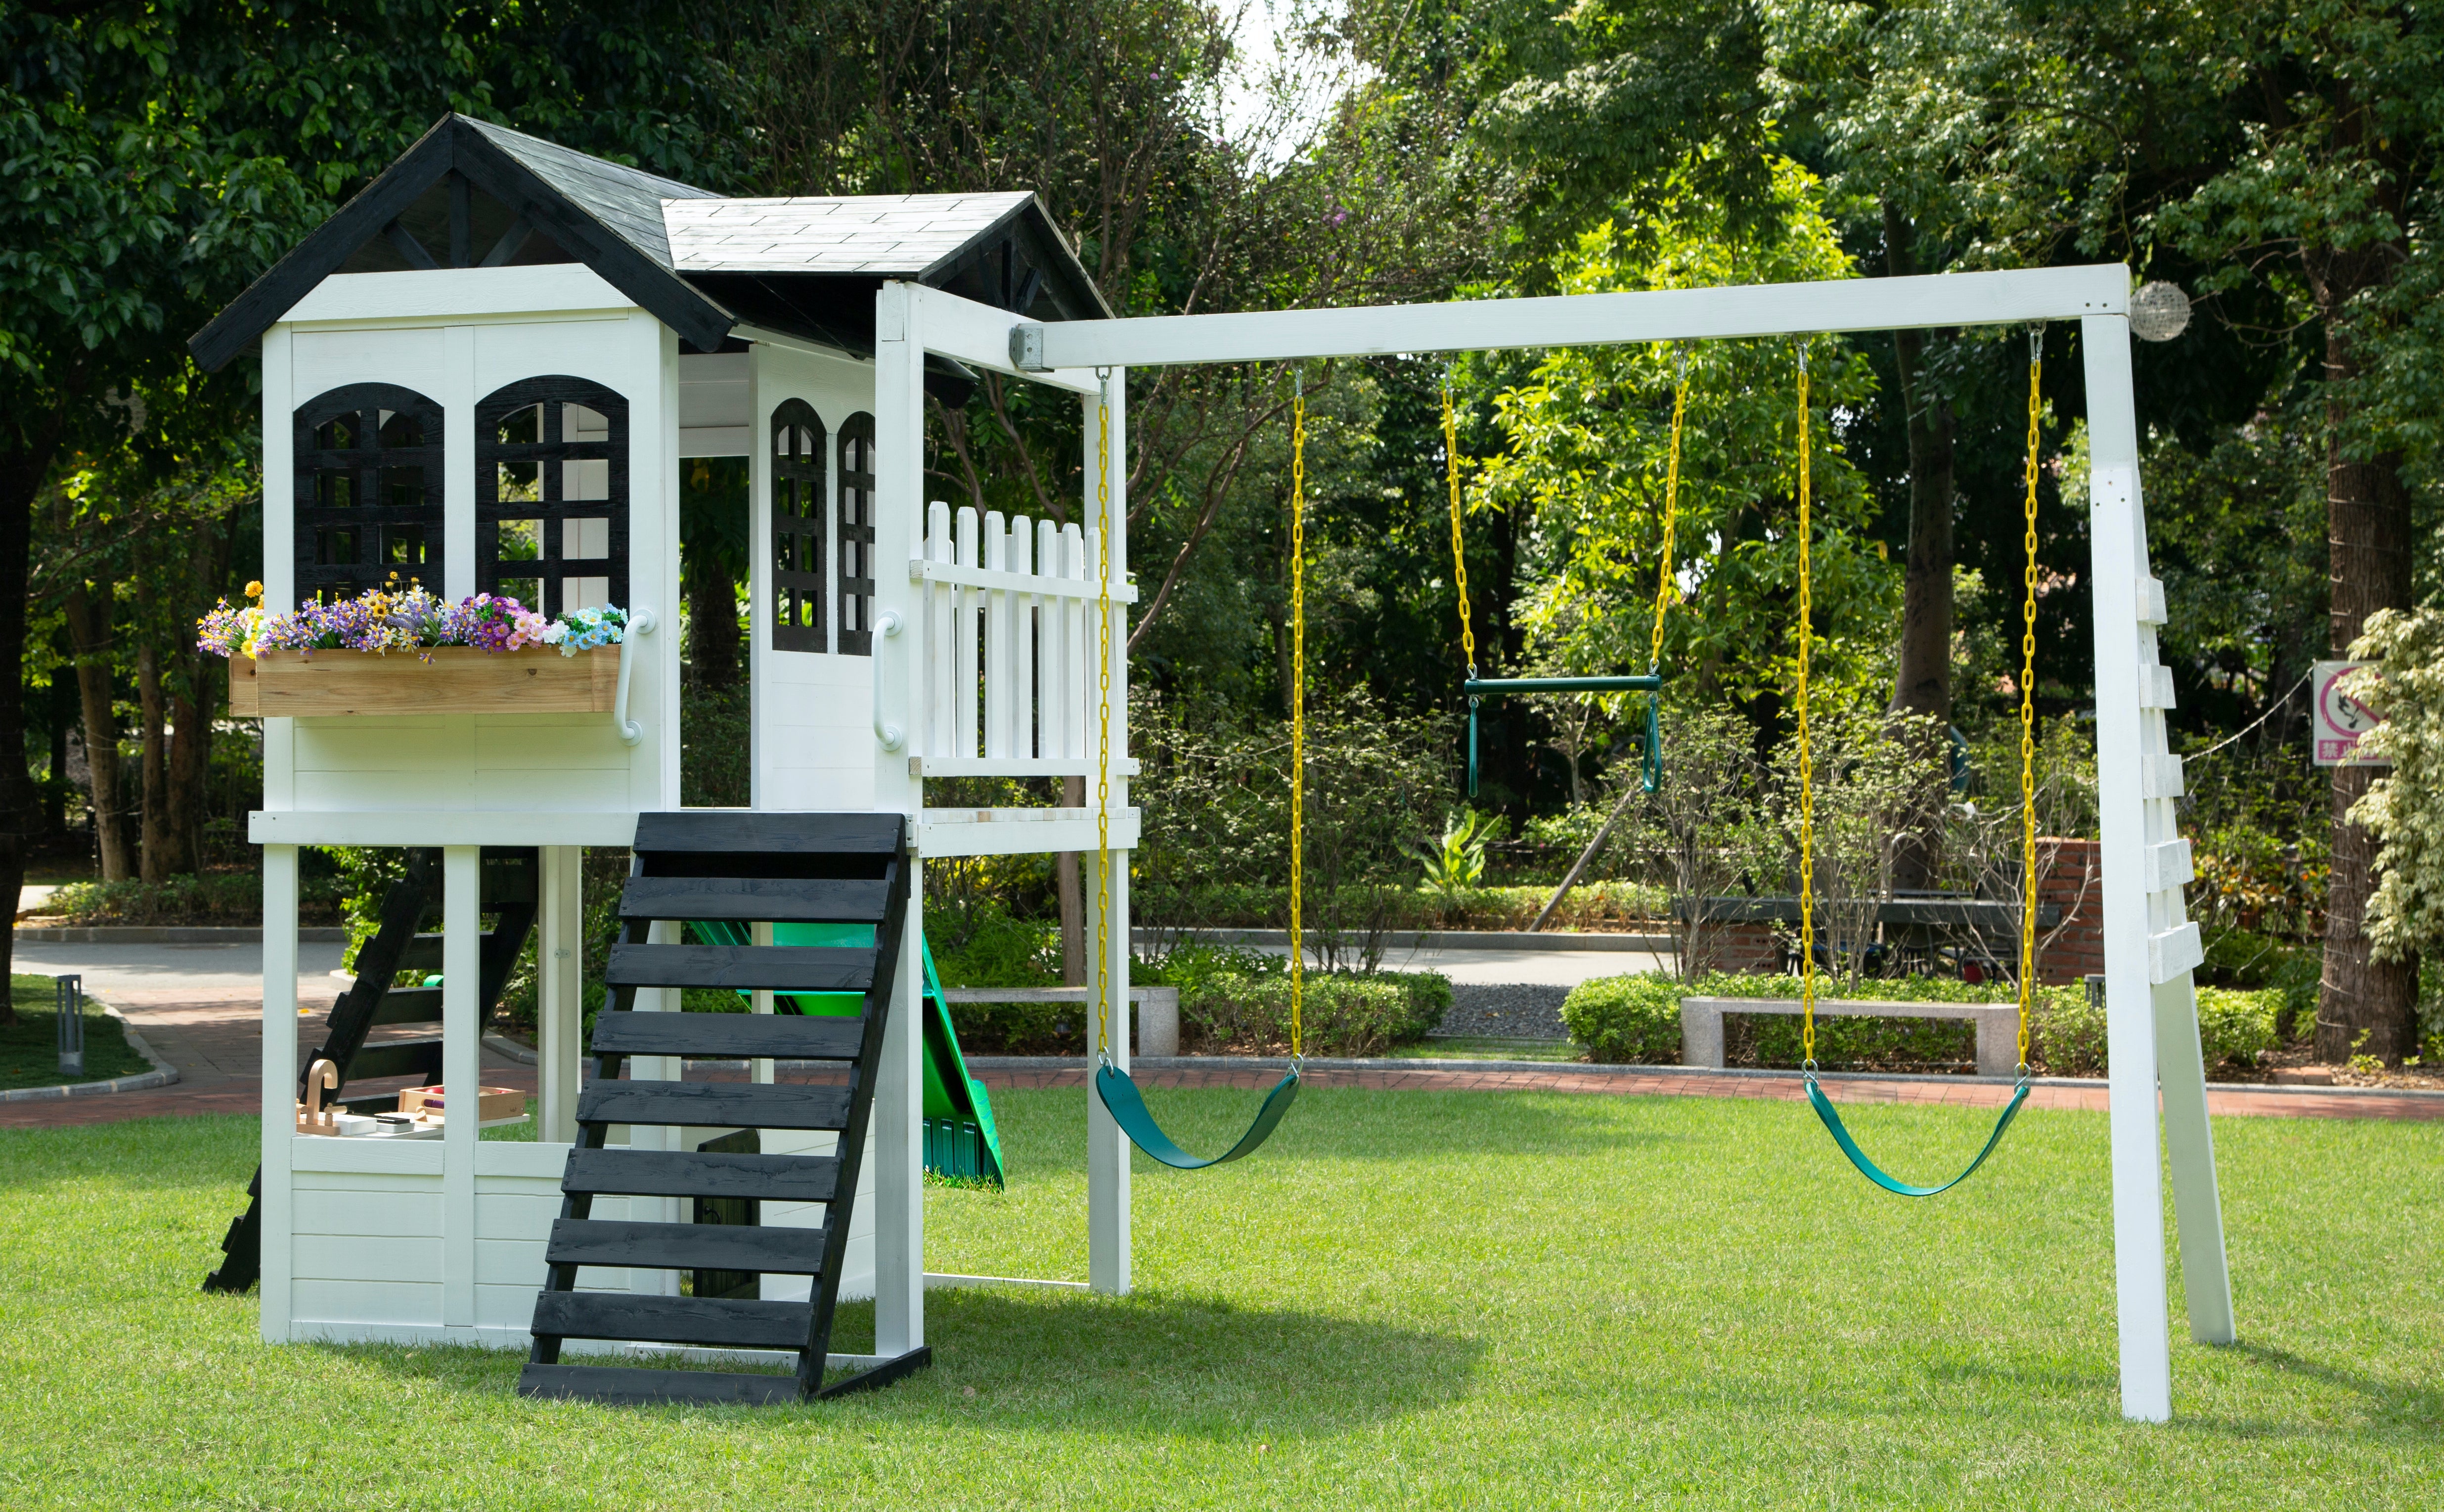 2MamaBees Reign Two Story Modern Farmhouse Black and White Playhouse with Slide and Optional Swings Playhouses